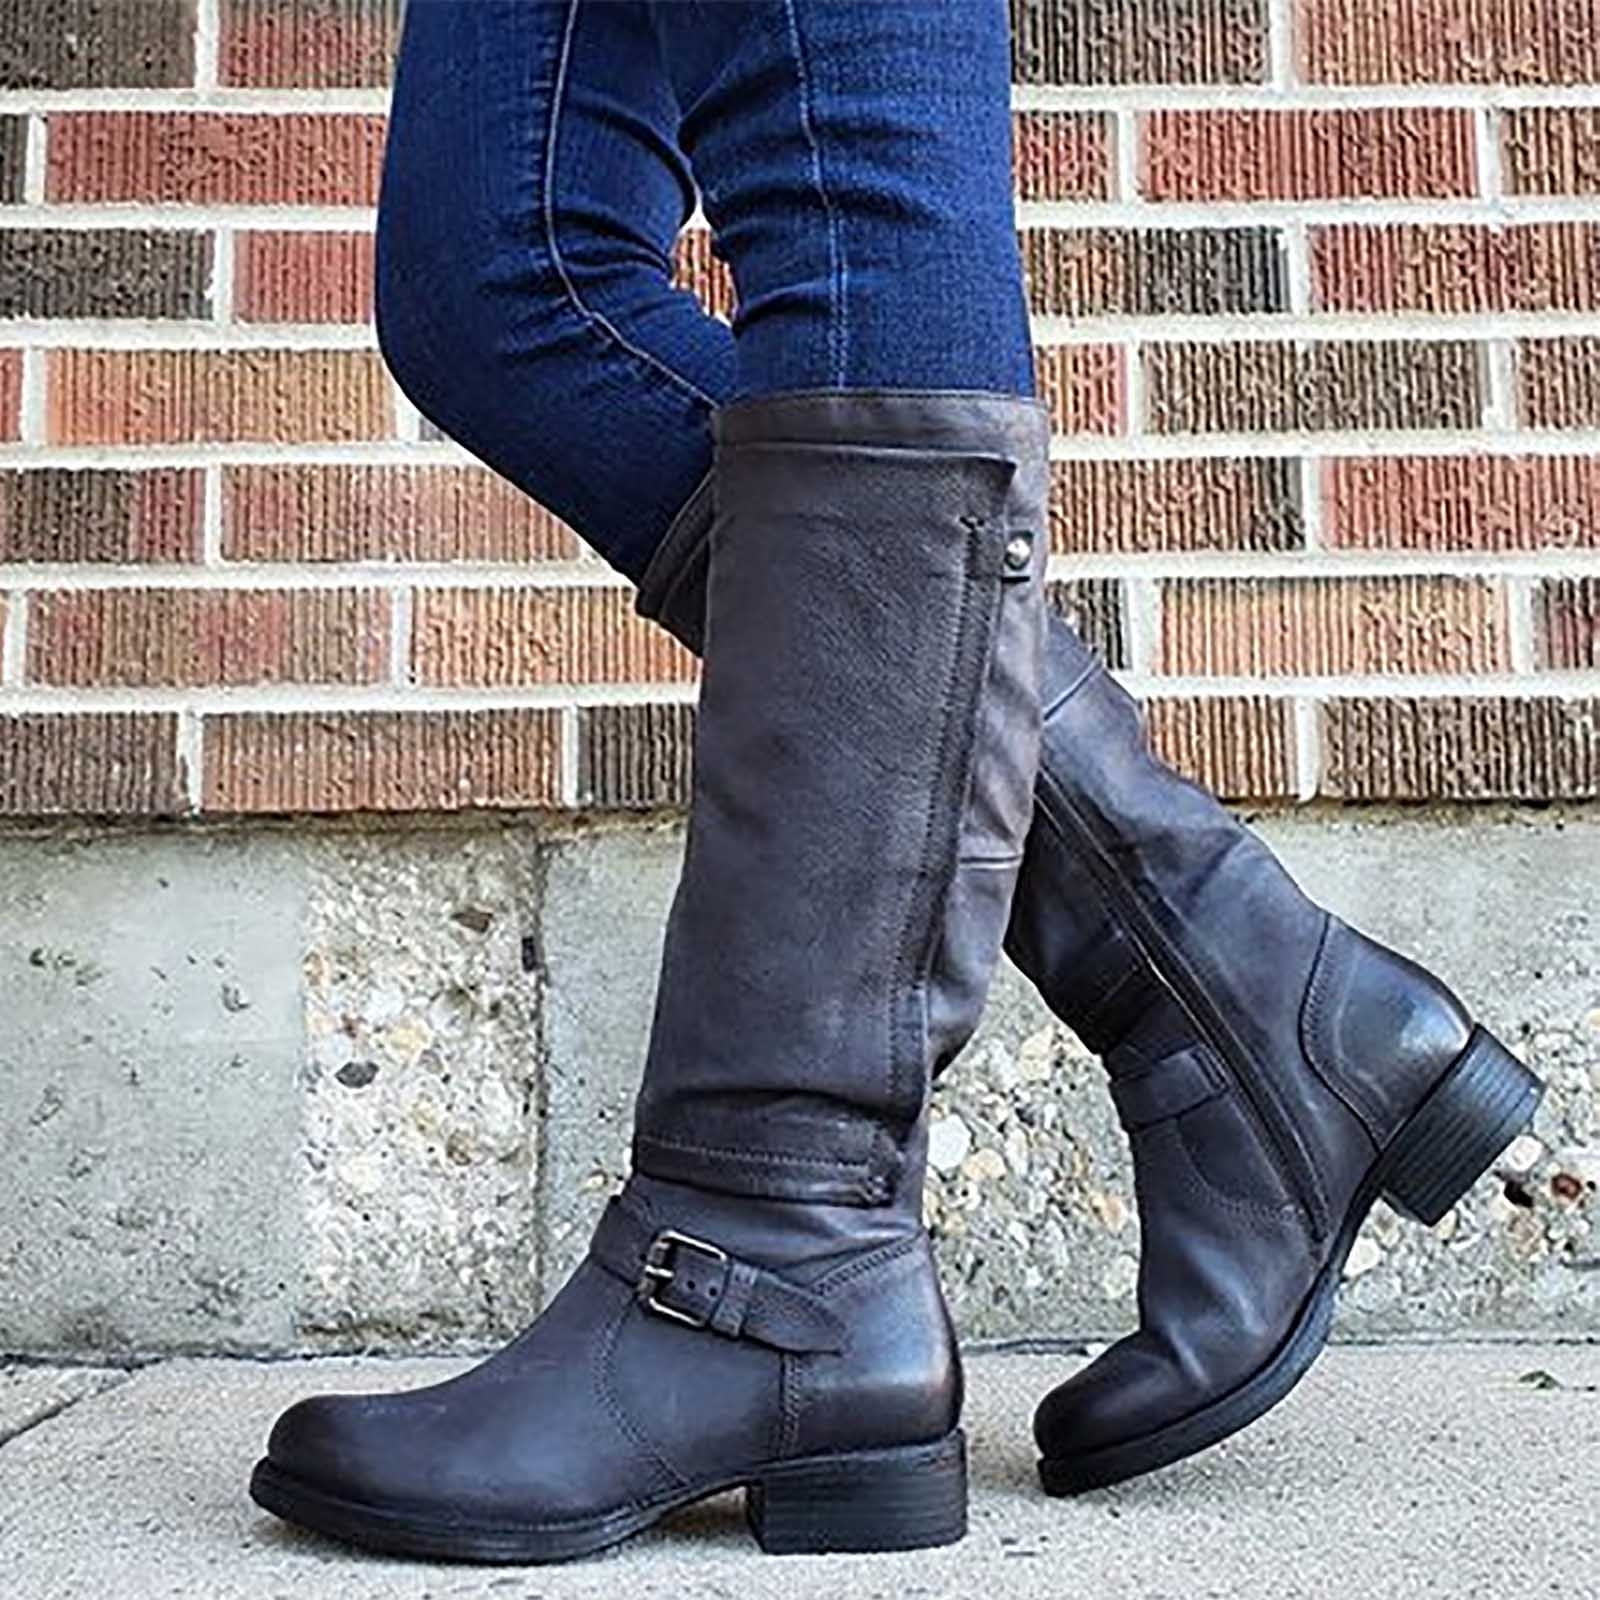 How To Wear Ankle Boots For Short Legs | Poor Little It Girl